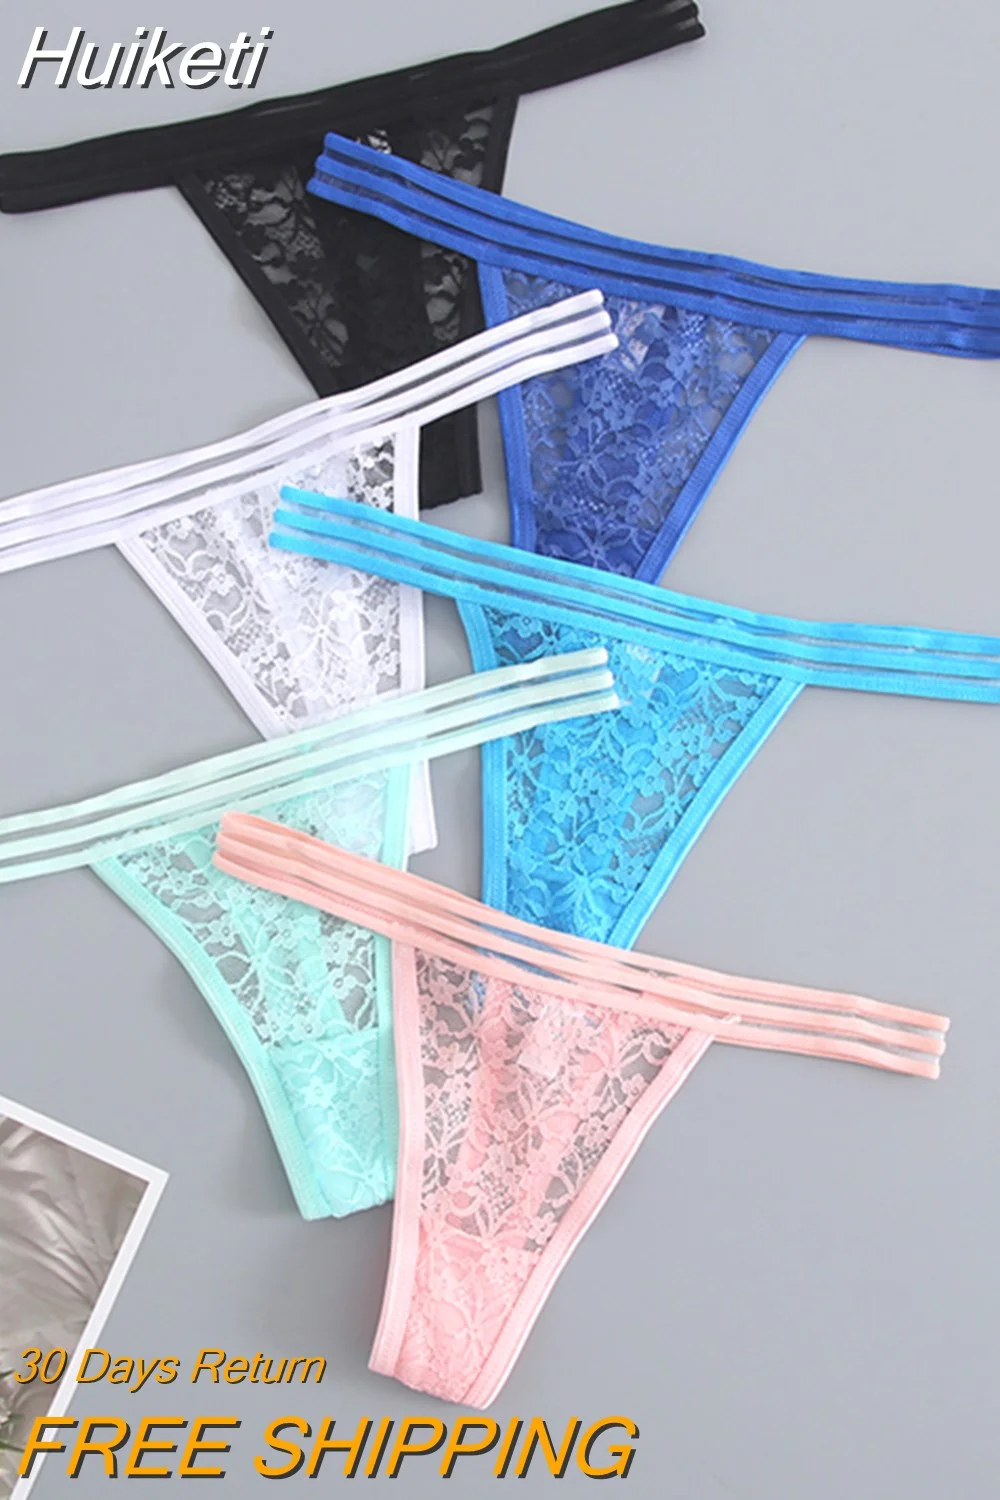 Huiketi Sexy Lace Women Thong Low Waist Seamless G-String Female Underpants Transparent Intimates Lingerie Comfort Panties